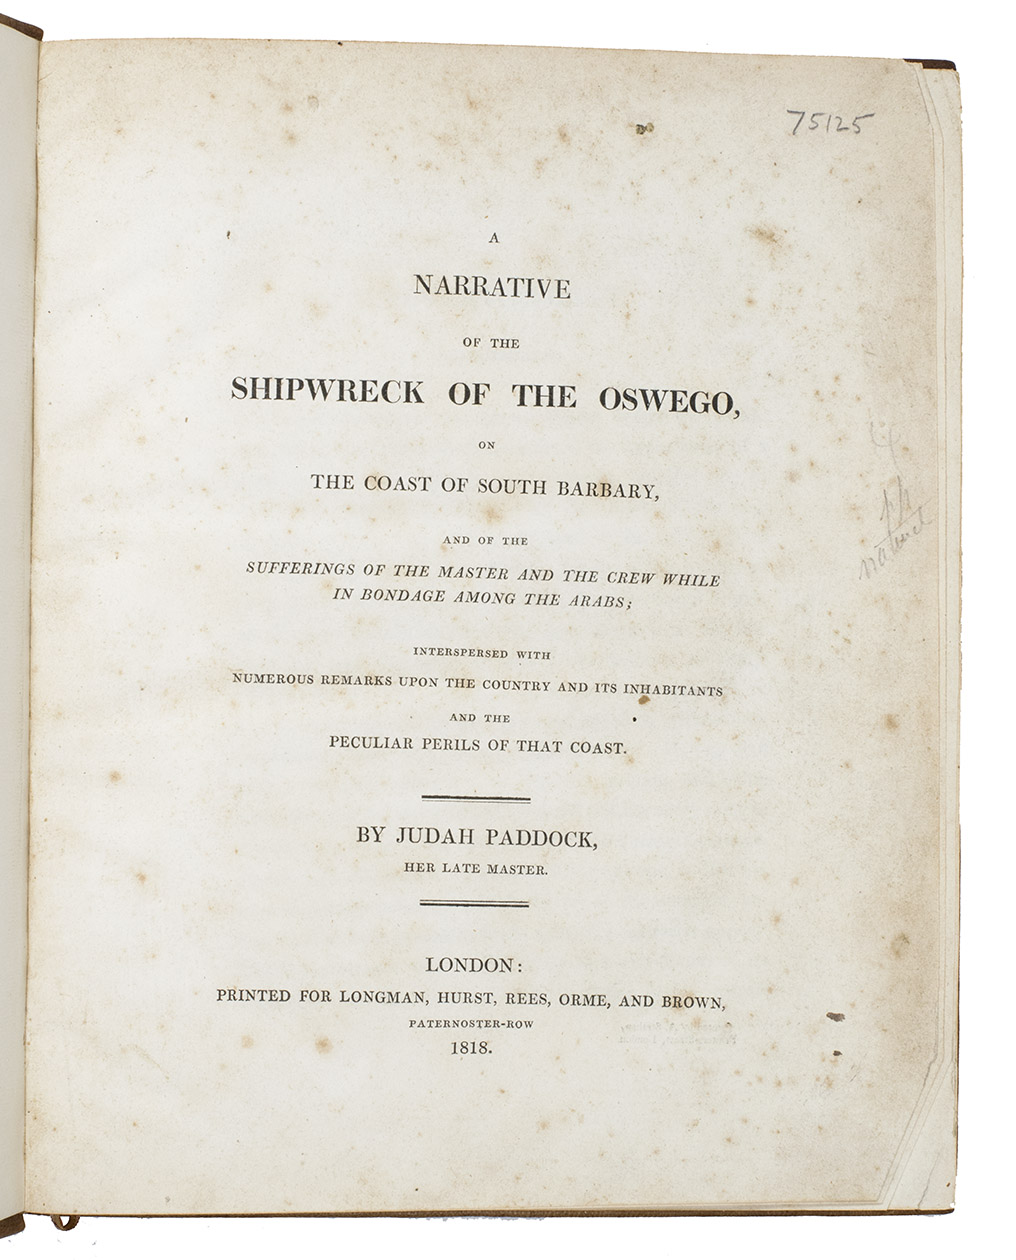 PADDOCK, Judah. - A narrative of the shipwreck of the Oswego, on the coast of South Barbary, ... London, Longman, Hurst, Rees, Orme and Brown (printed by Andrew Strahan), 1818. 4to. 20th-century tan goatskin morocco.